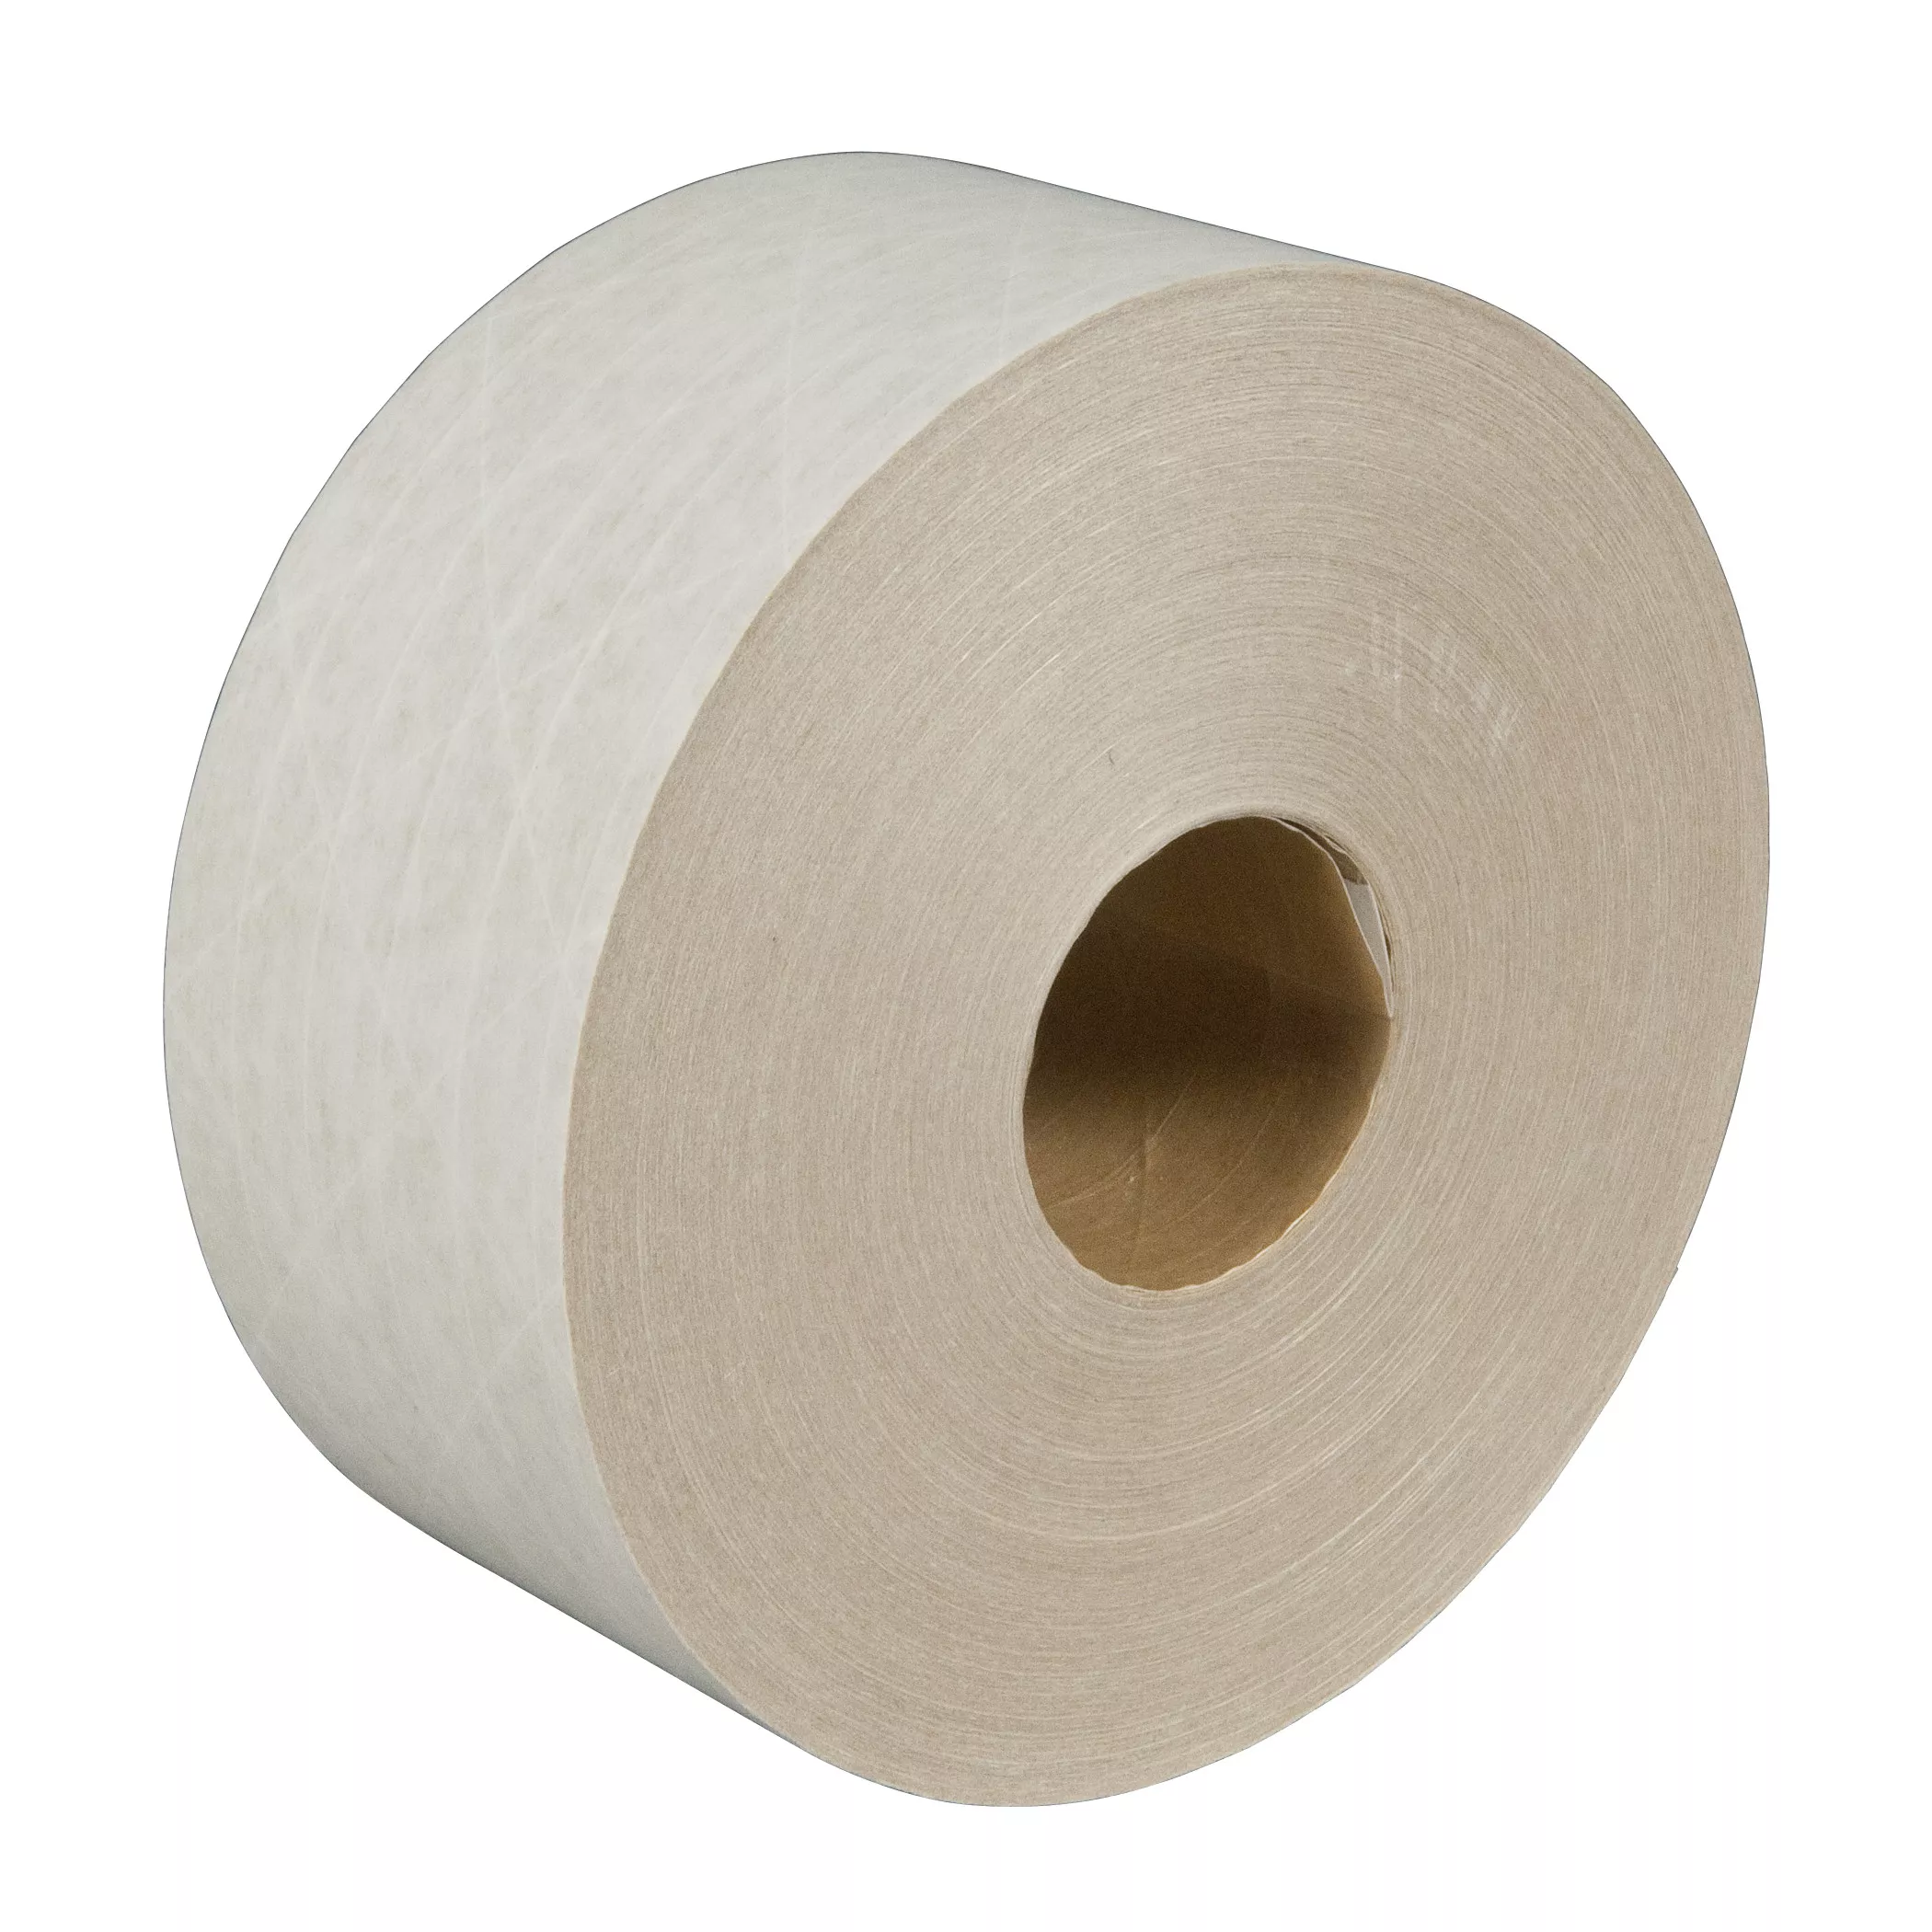 3M™ Water Activated Paper Tape 6145, White, Light Duty Reinforced, 6
in
x 4500 ft, Pallet Pack